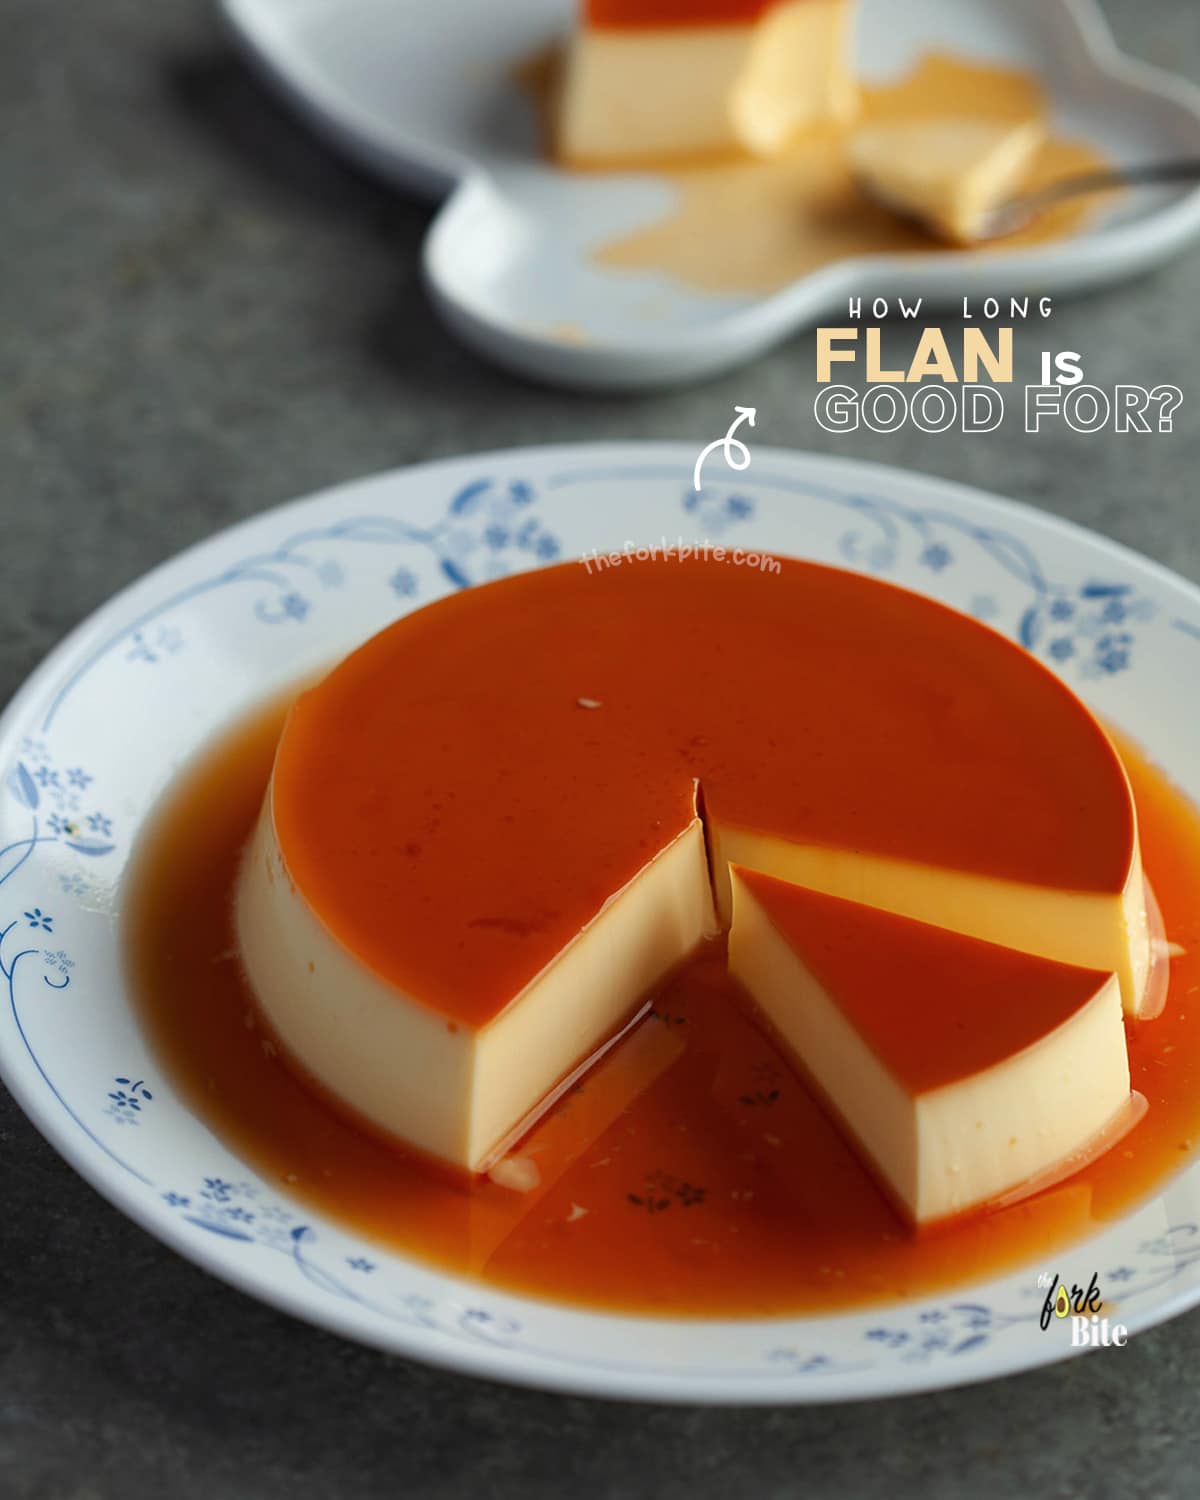 Generally, it’s best to consume Flan within 3 to 5 days of making it or in the freezer for two months. After that, the quality of the dessert begins to deteriorate. So, if you want to save some for later, it’s definitely doable! Just make sure to thaw it out in the fridge before serving.